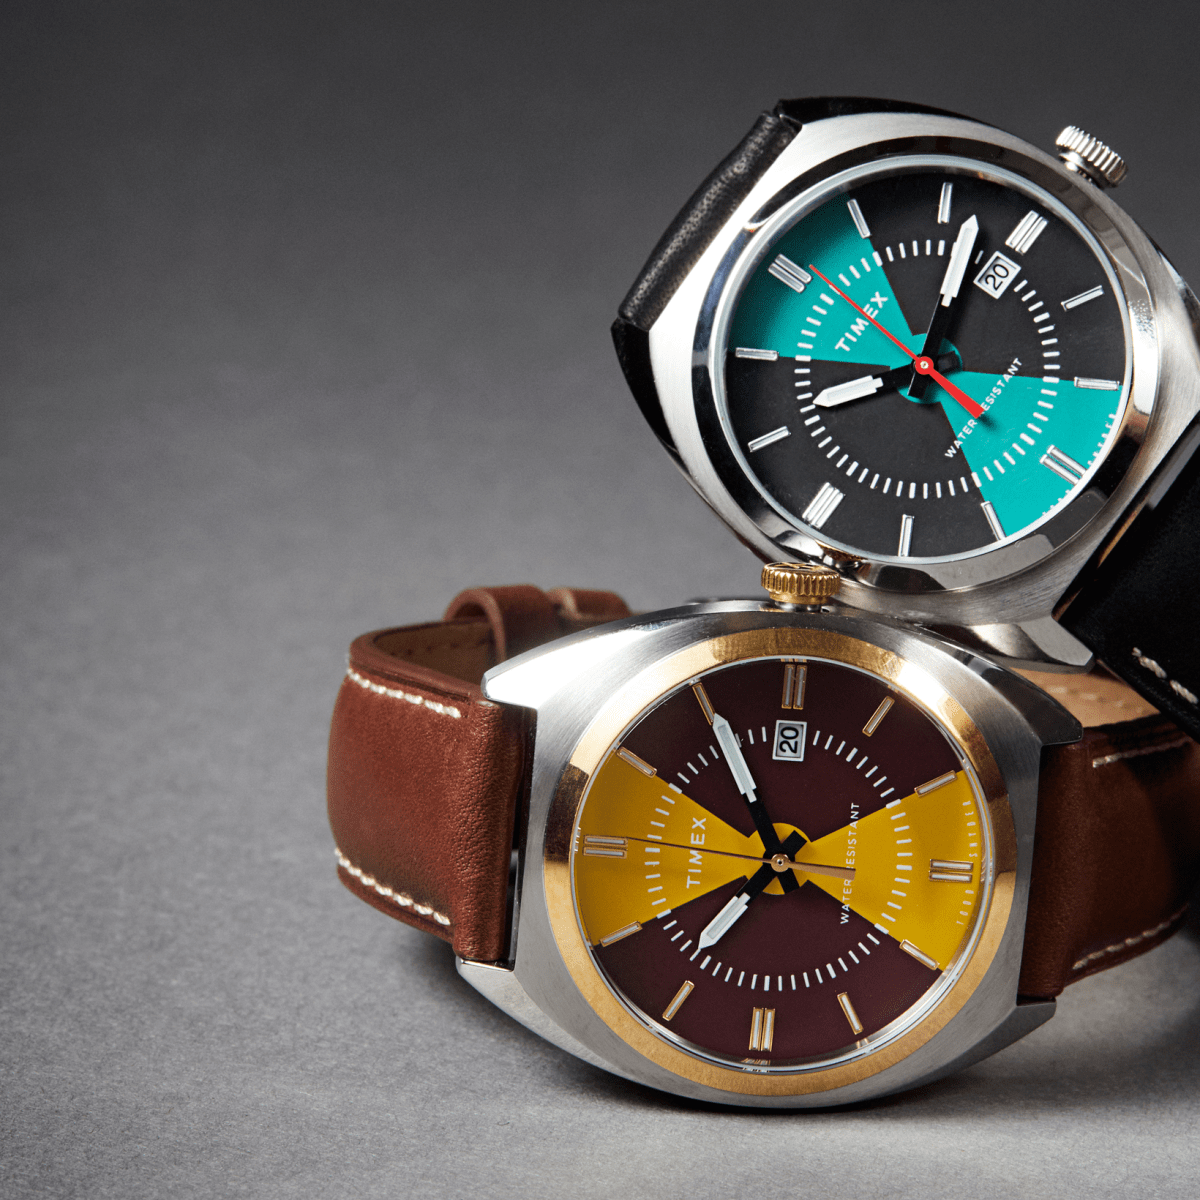 Todd Snyder x Timex Impress With New Colorblock Milano Watch - Airows